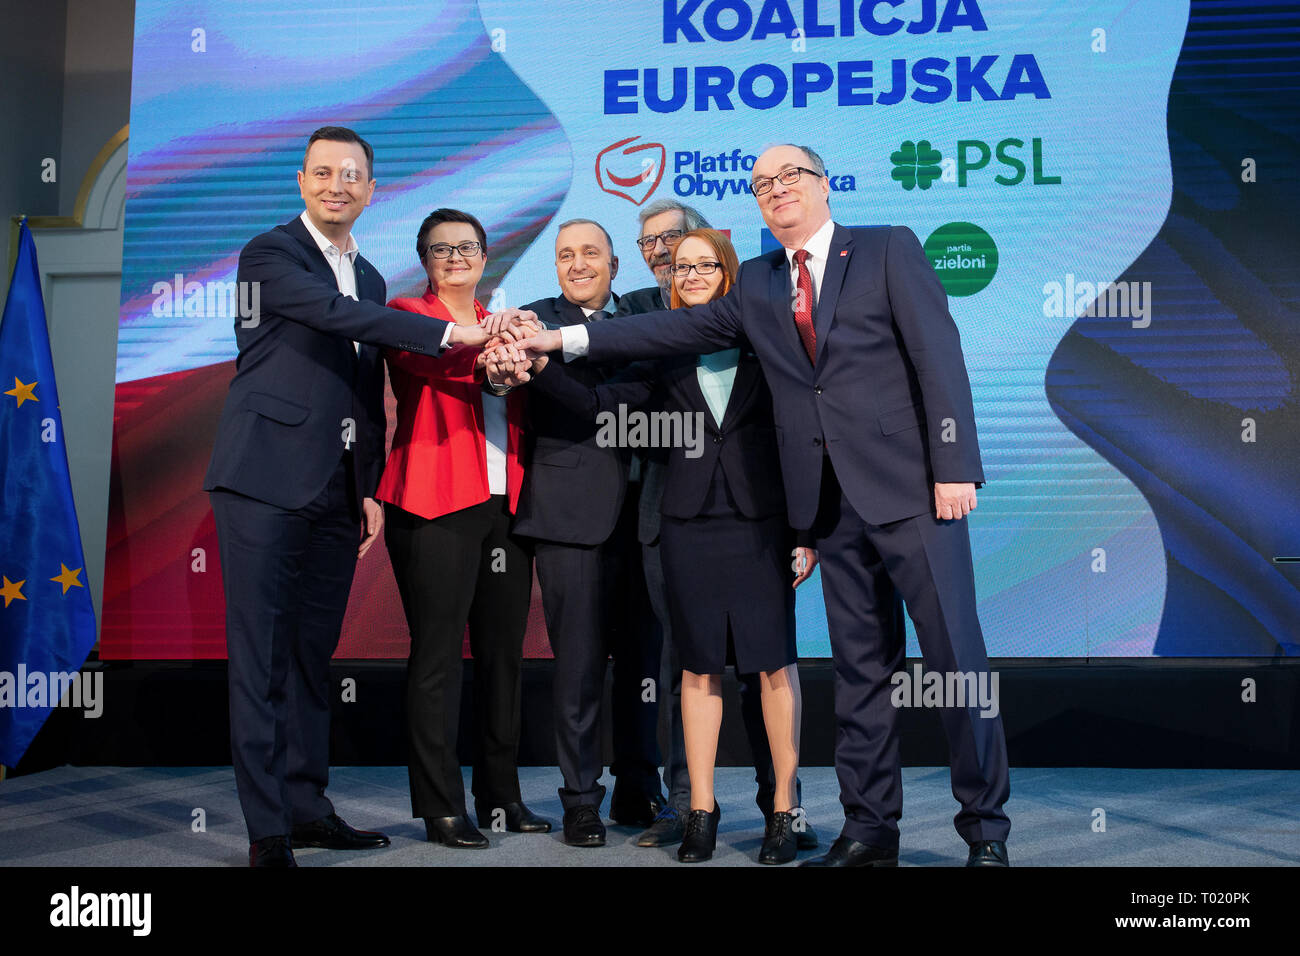 Wladyslaw Kosiniak-Kamysz, Katarzyna Lubnauer, Grzegorz Schetyna, Malgorzata Tracz and Wlodzimierz Czarzasty during a joint press conference of the ''European Coalition'' (five polish largest opposition parties) leaders in Warsaw, Poland on 24 February 2019. Five Polish opposition parties (Civic Platform, Modern party, Polish People’s Party, Democratic Left Alliance and Poland’s Greens) on Sunday signed a coalition declaration, ahead of the upcoming European Parliament Elections, and created initiative billed as the European Coalition. Stock Photo